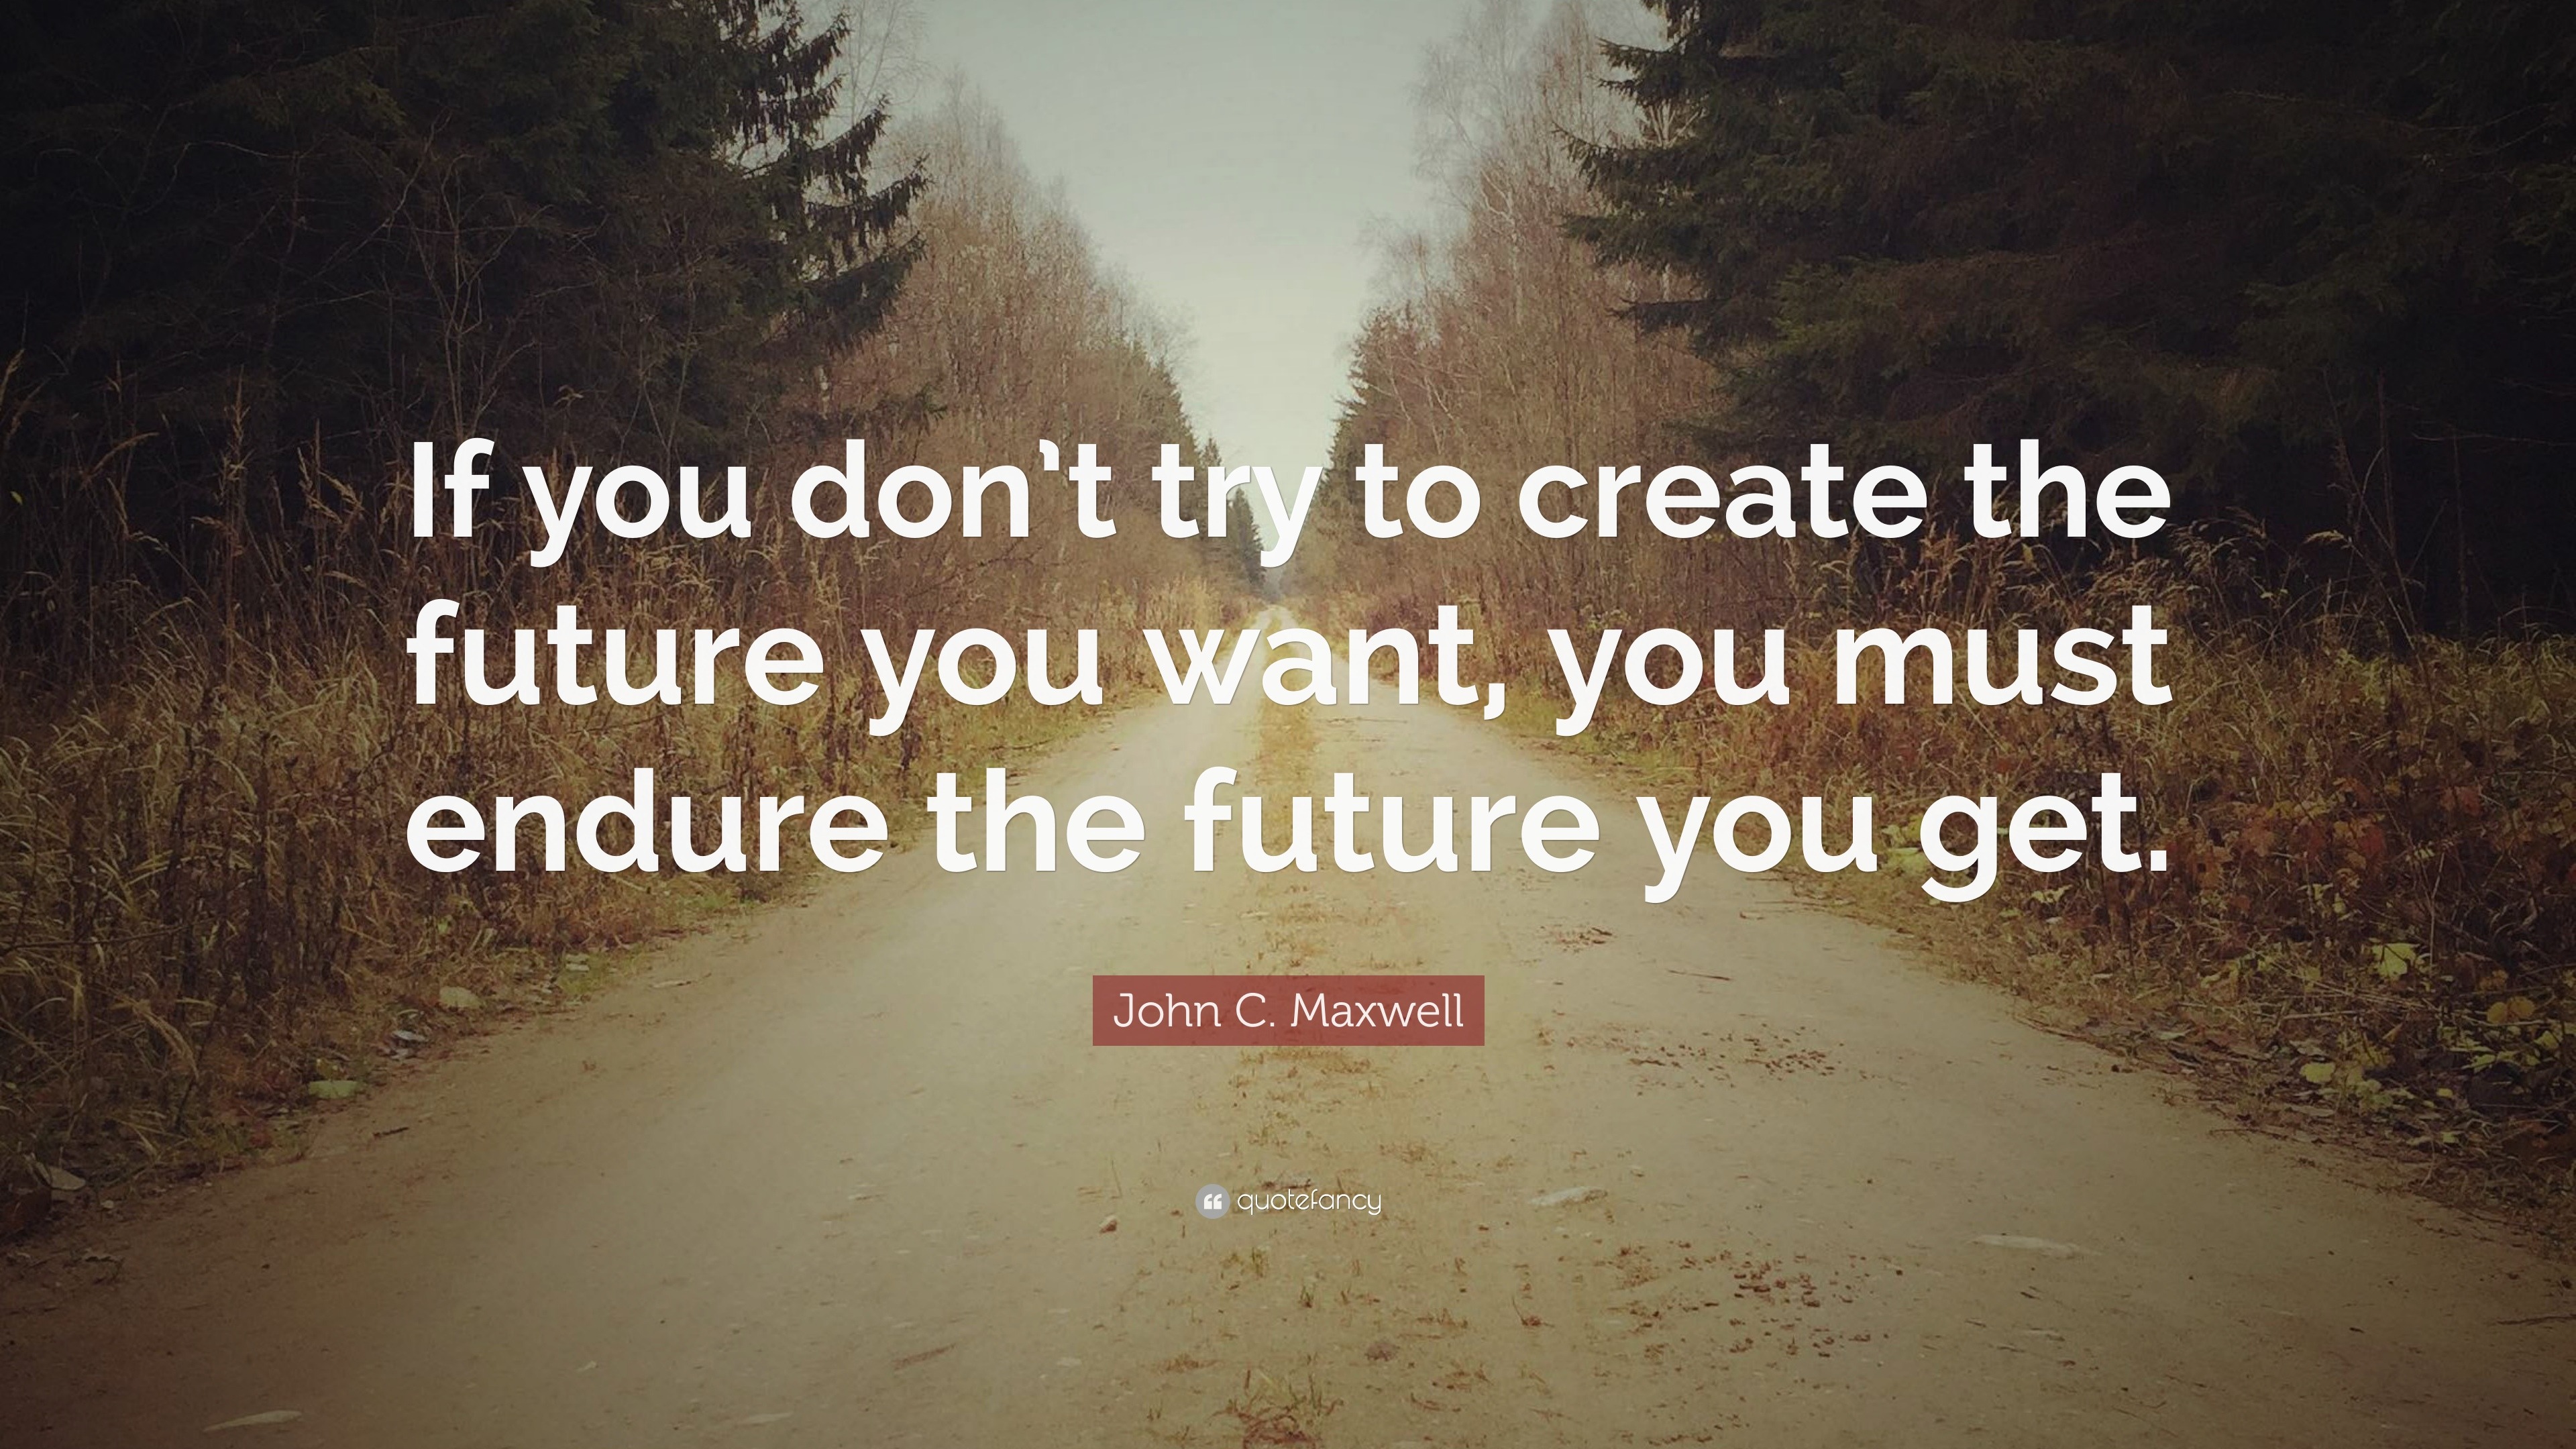 John C. Maxwell Quote: "If you don't try to create the future you want ...